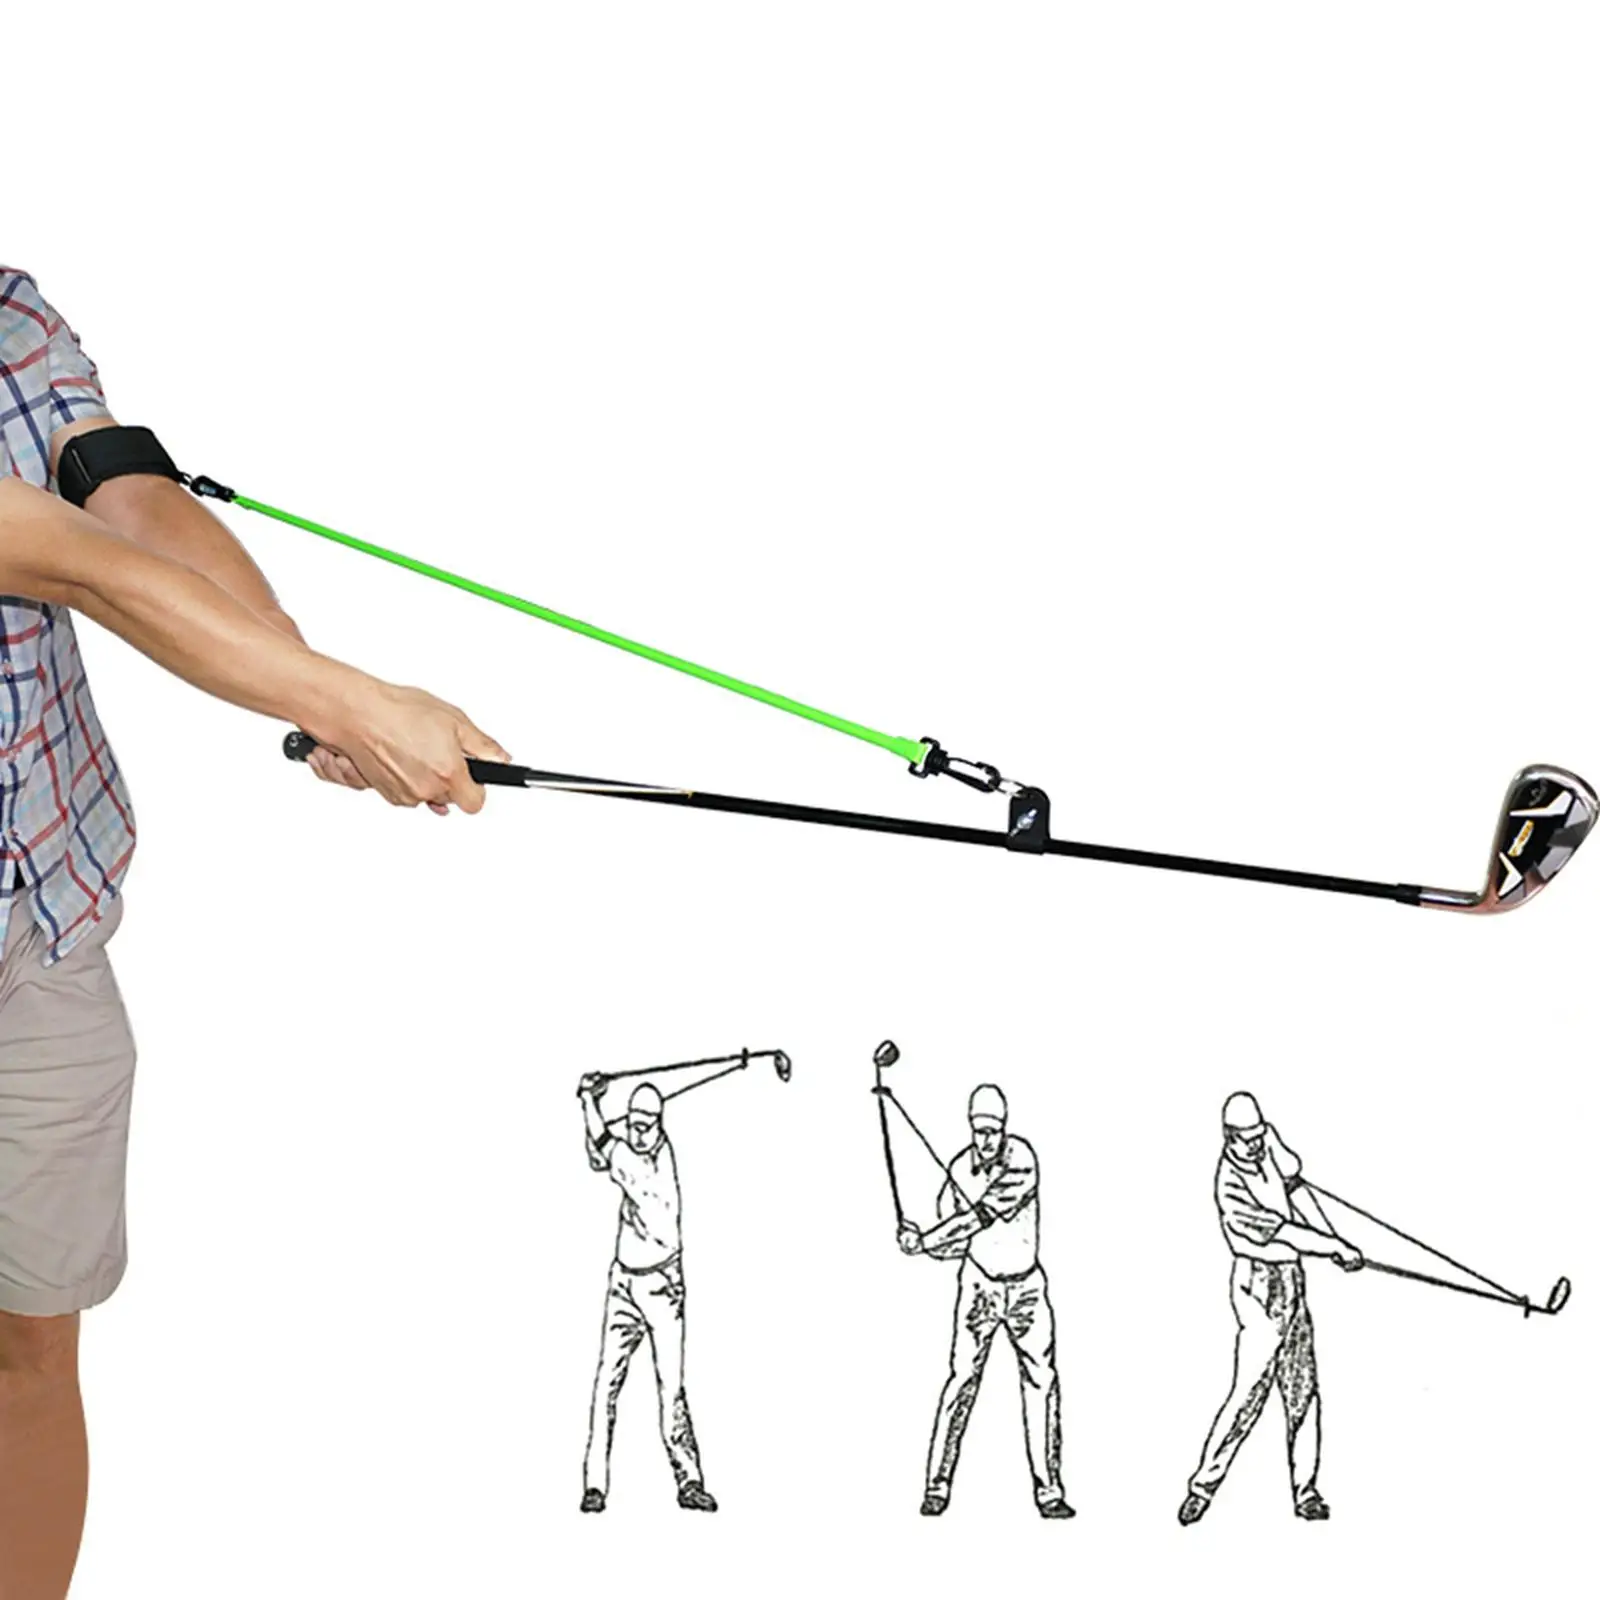 Golf Swing Trainer Golf Training Aid for Improving Swing Stability and Power